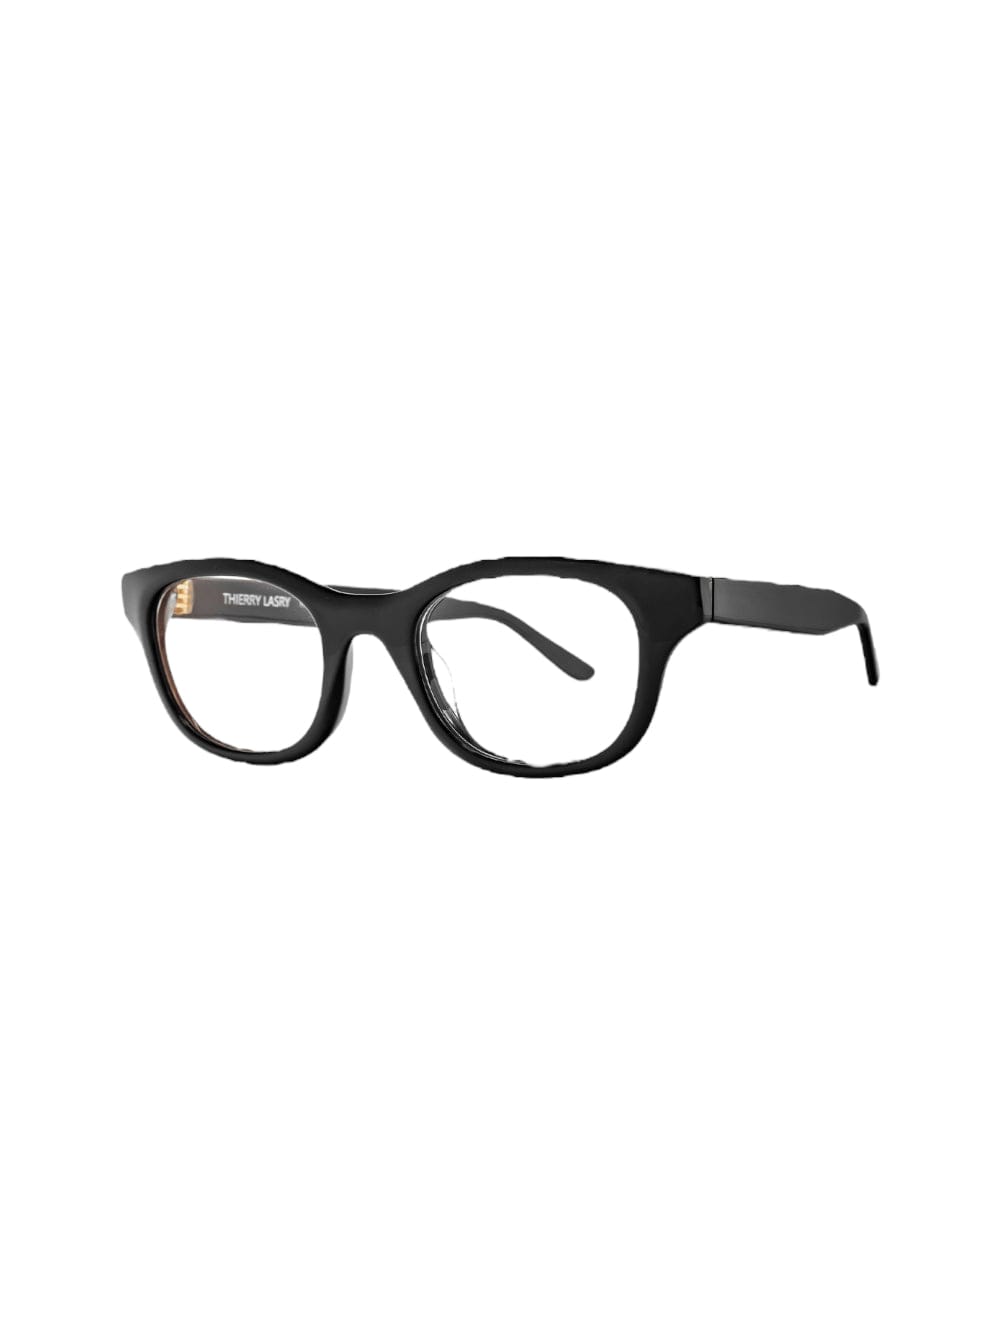 Thierry Lasry Chaoty - Black Glasses